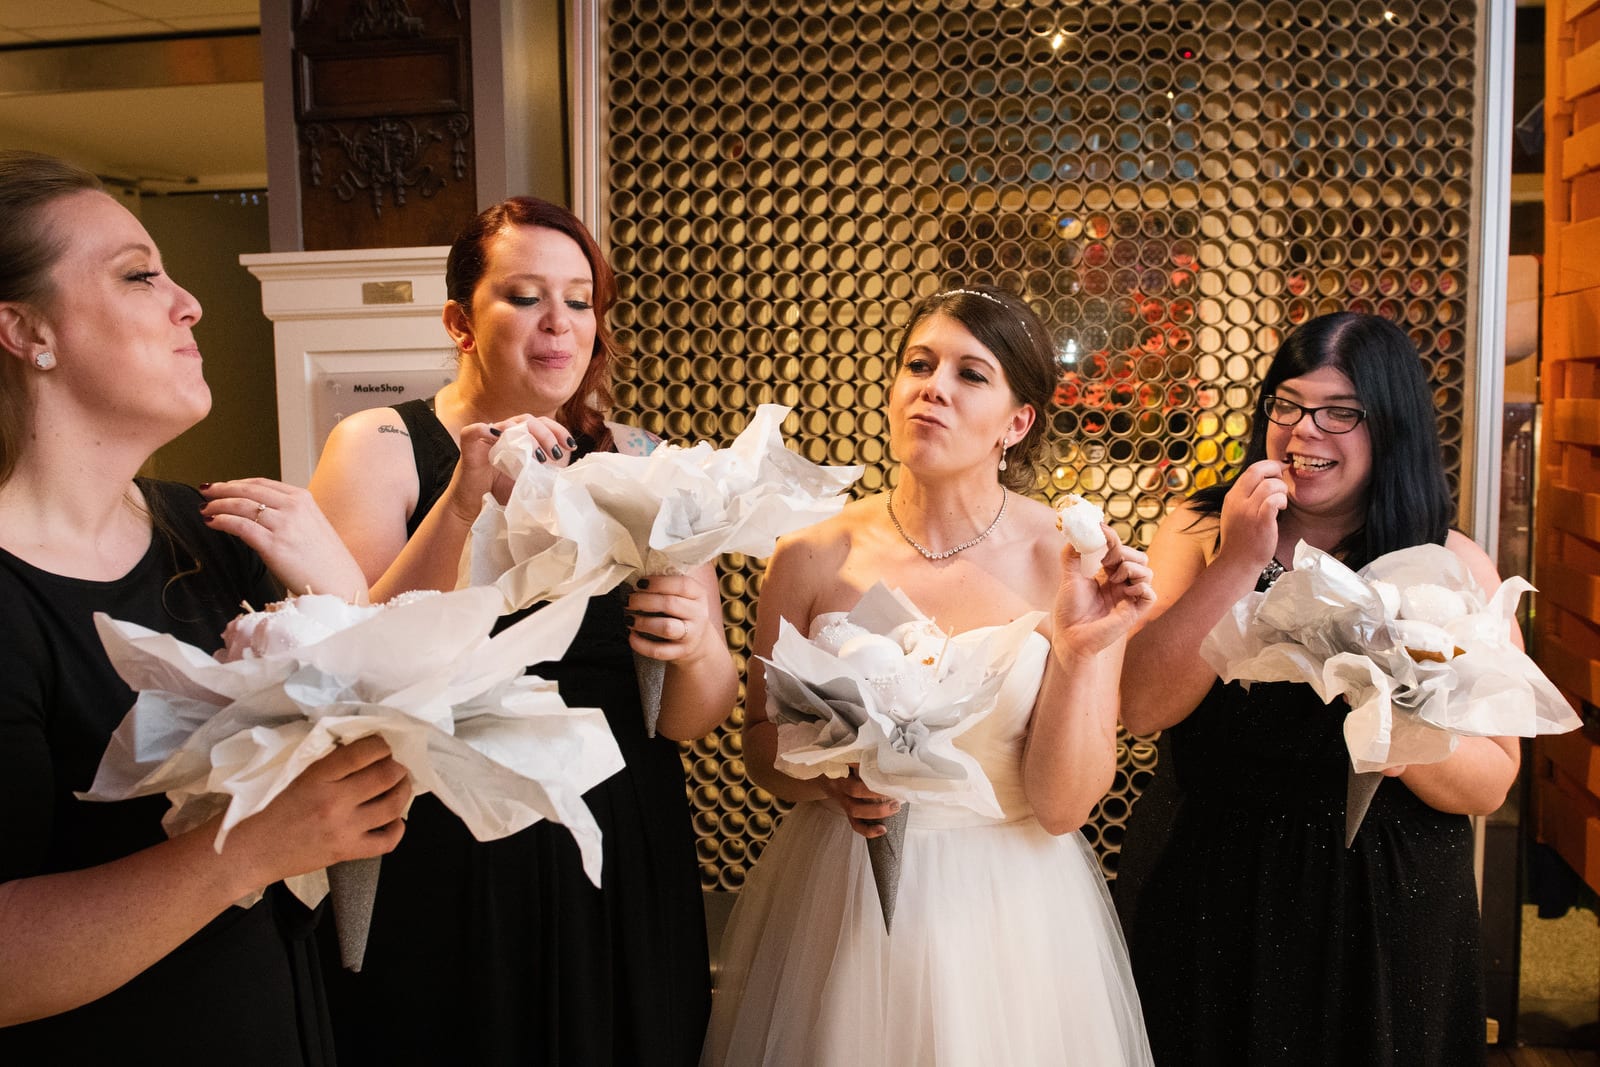 A bride and her bridesmaids munch the donuts from their bouquets.